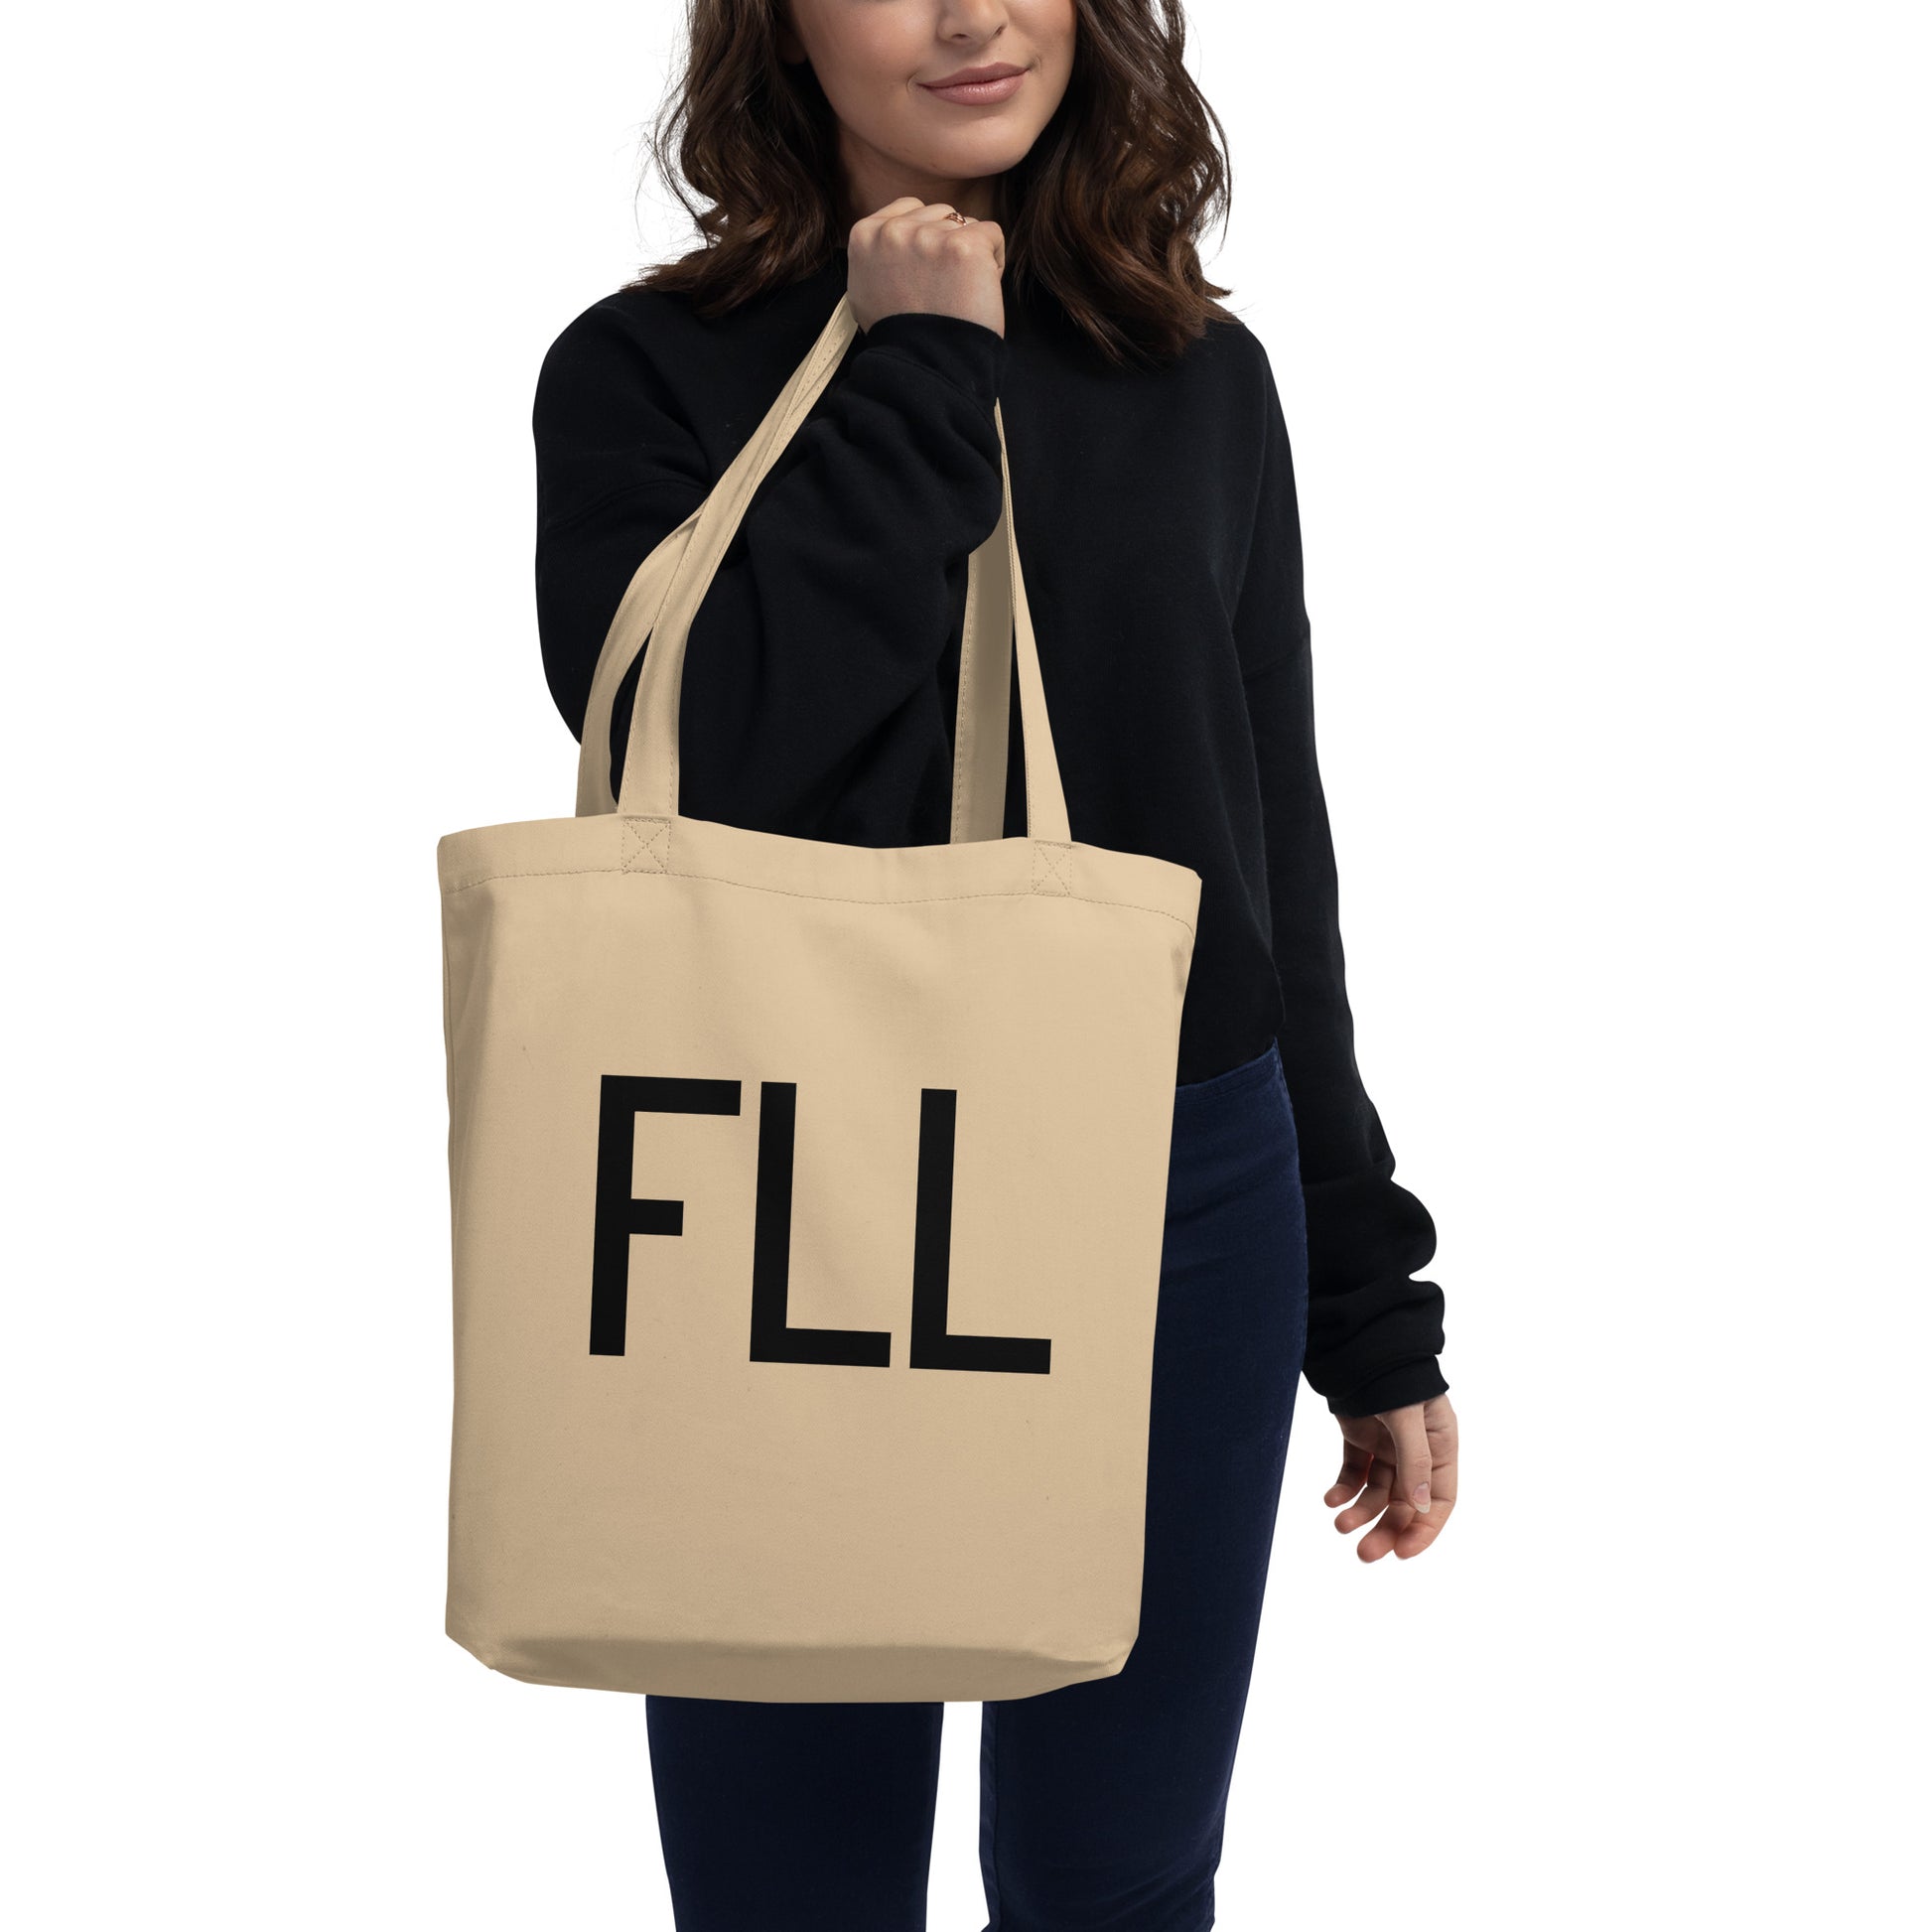 Aviation Gift Organic Tote - Black • FLL Fort Lauderdale • YHM Designs - Image 03